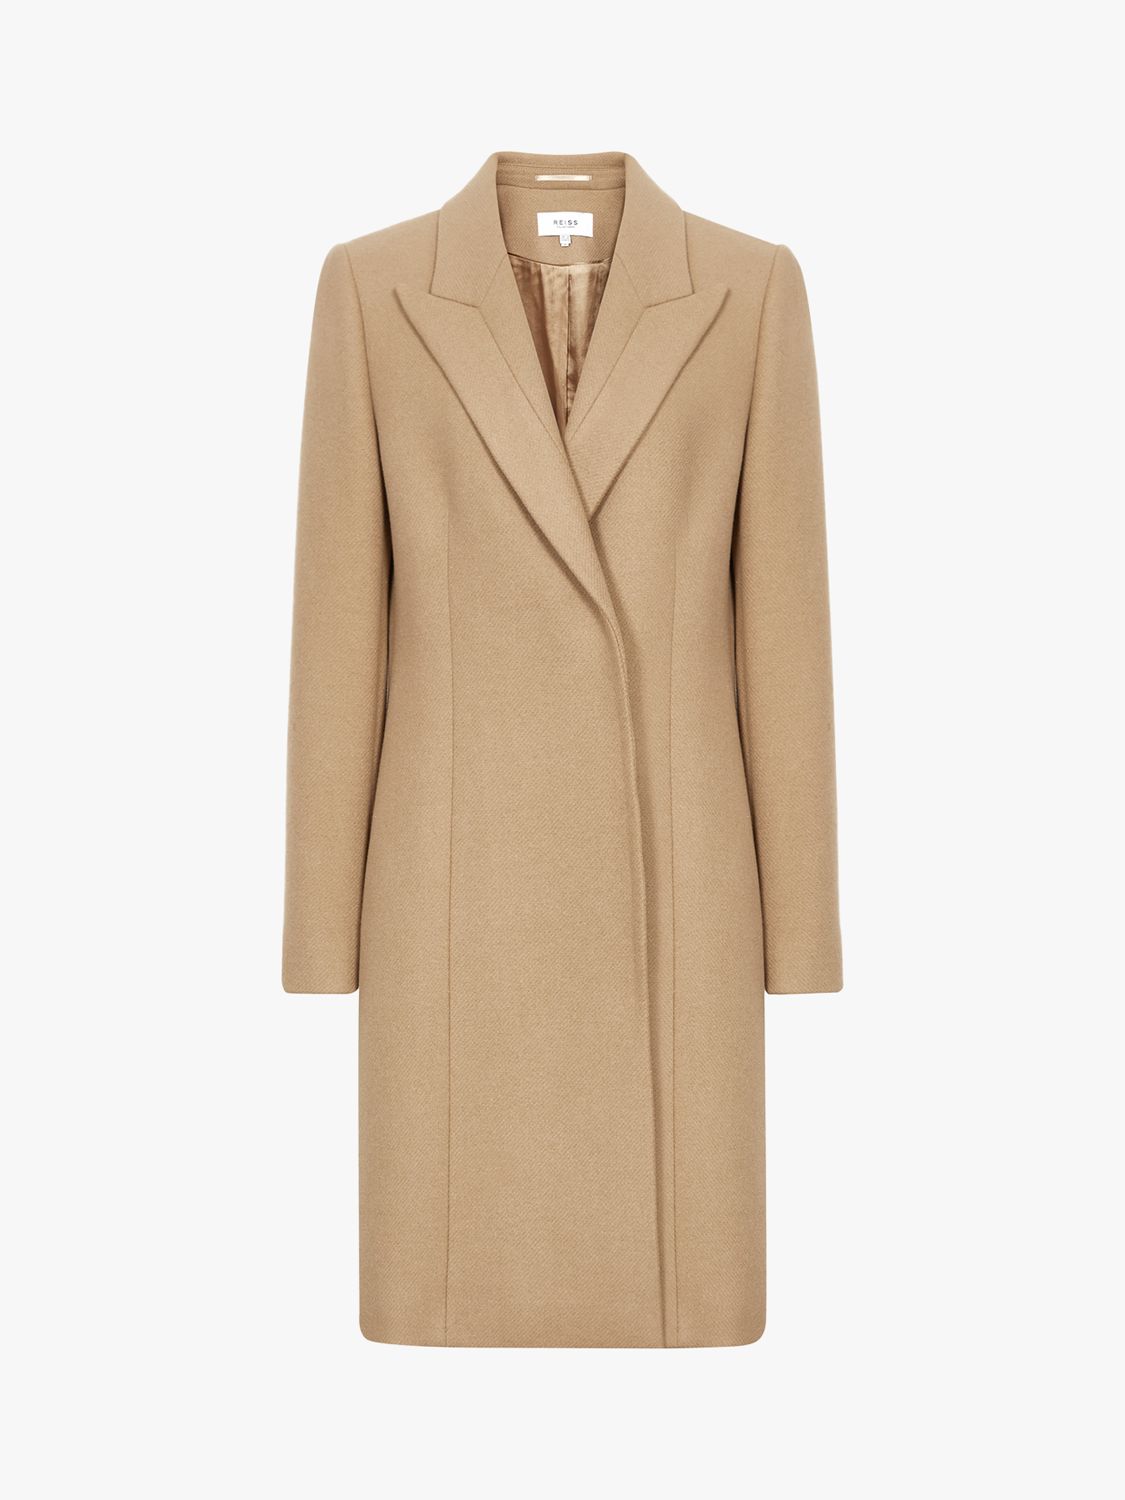 Reiss Marlow Tailored Coat, Camel